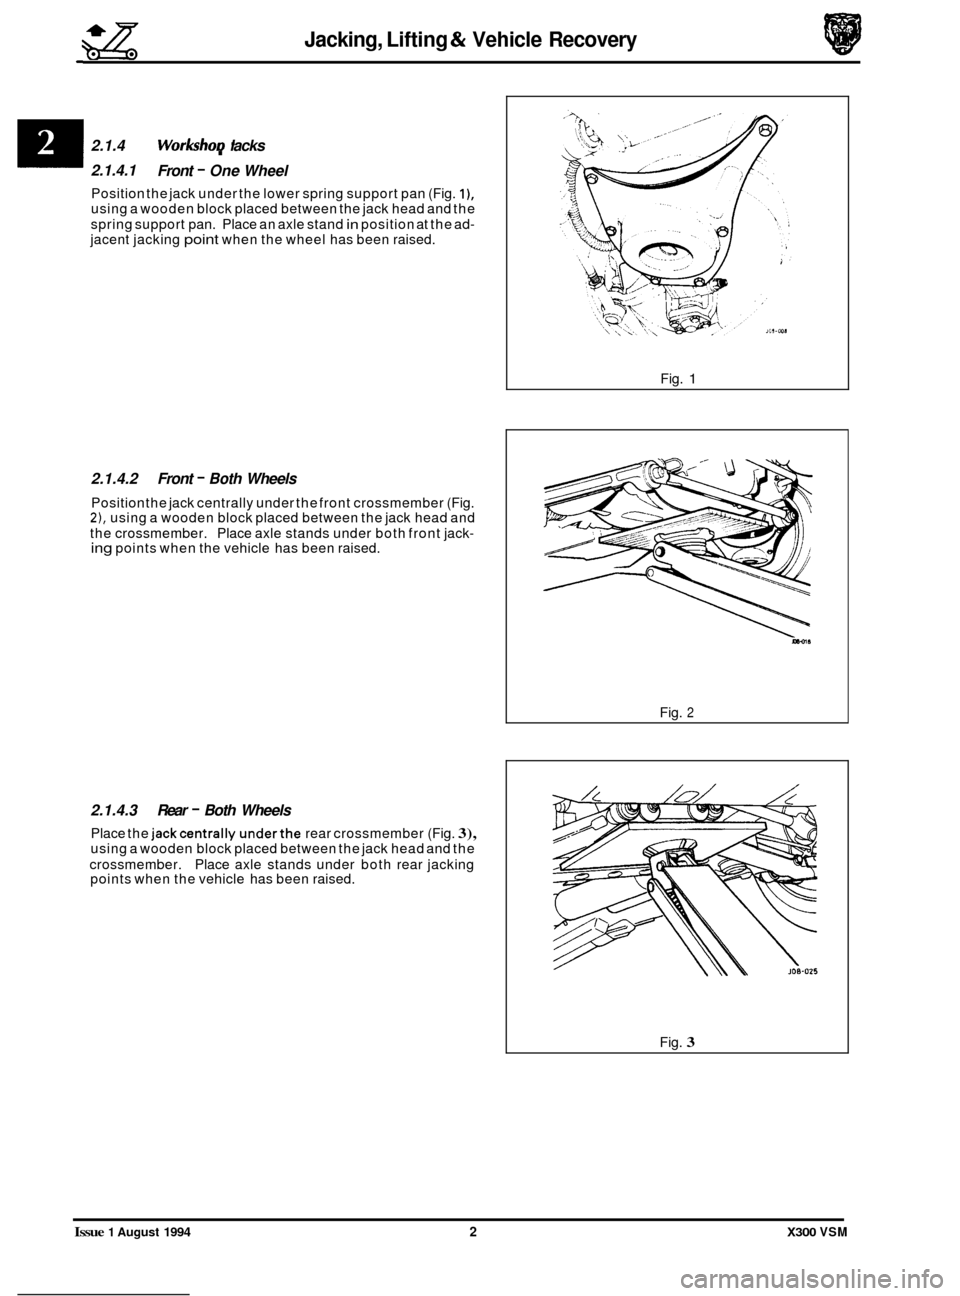 JAGUAR XJ6 1994 2.G Workshop Manual gg Jacking, Lifting & Vehicle Recovery 
.- 
- 2.1.4.1 
Front - One Wheel 
Position  the jack  under  the lower  spring  support  pan (Fig. I), using  a wooden  block placed  between  the jack  head an